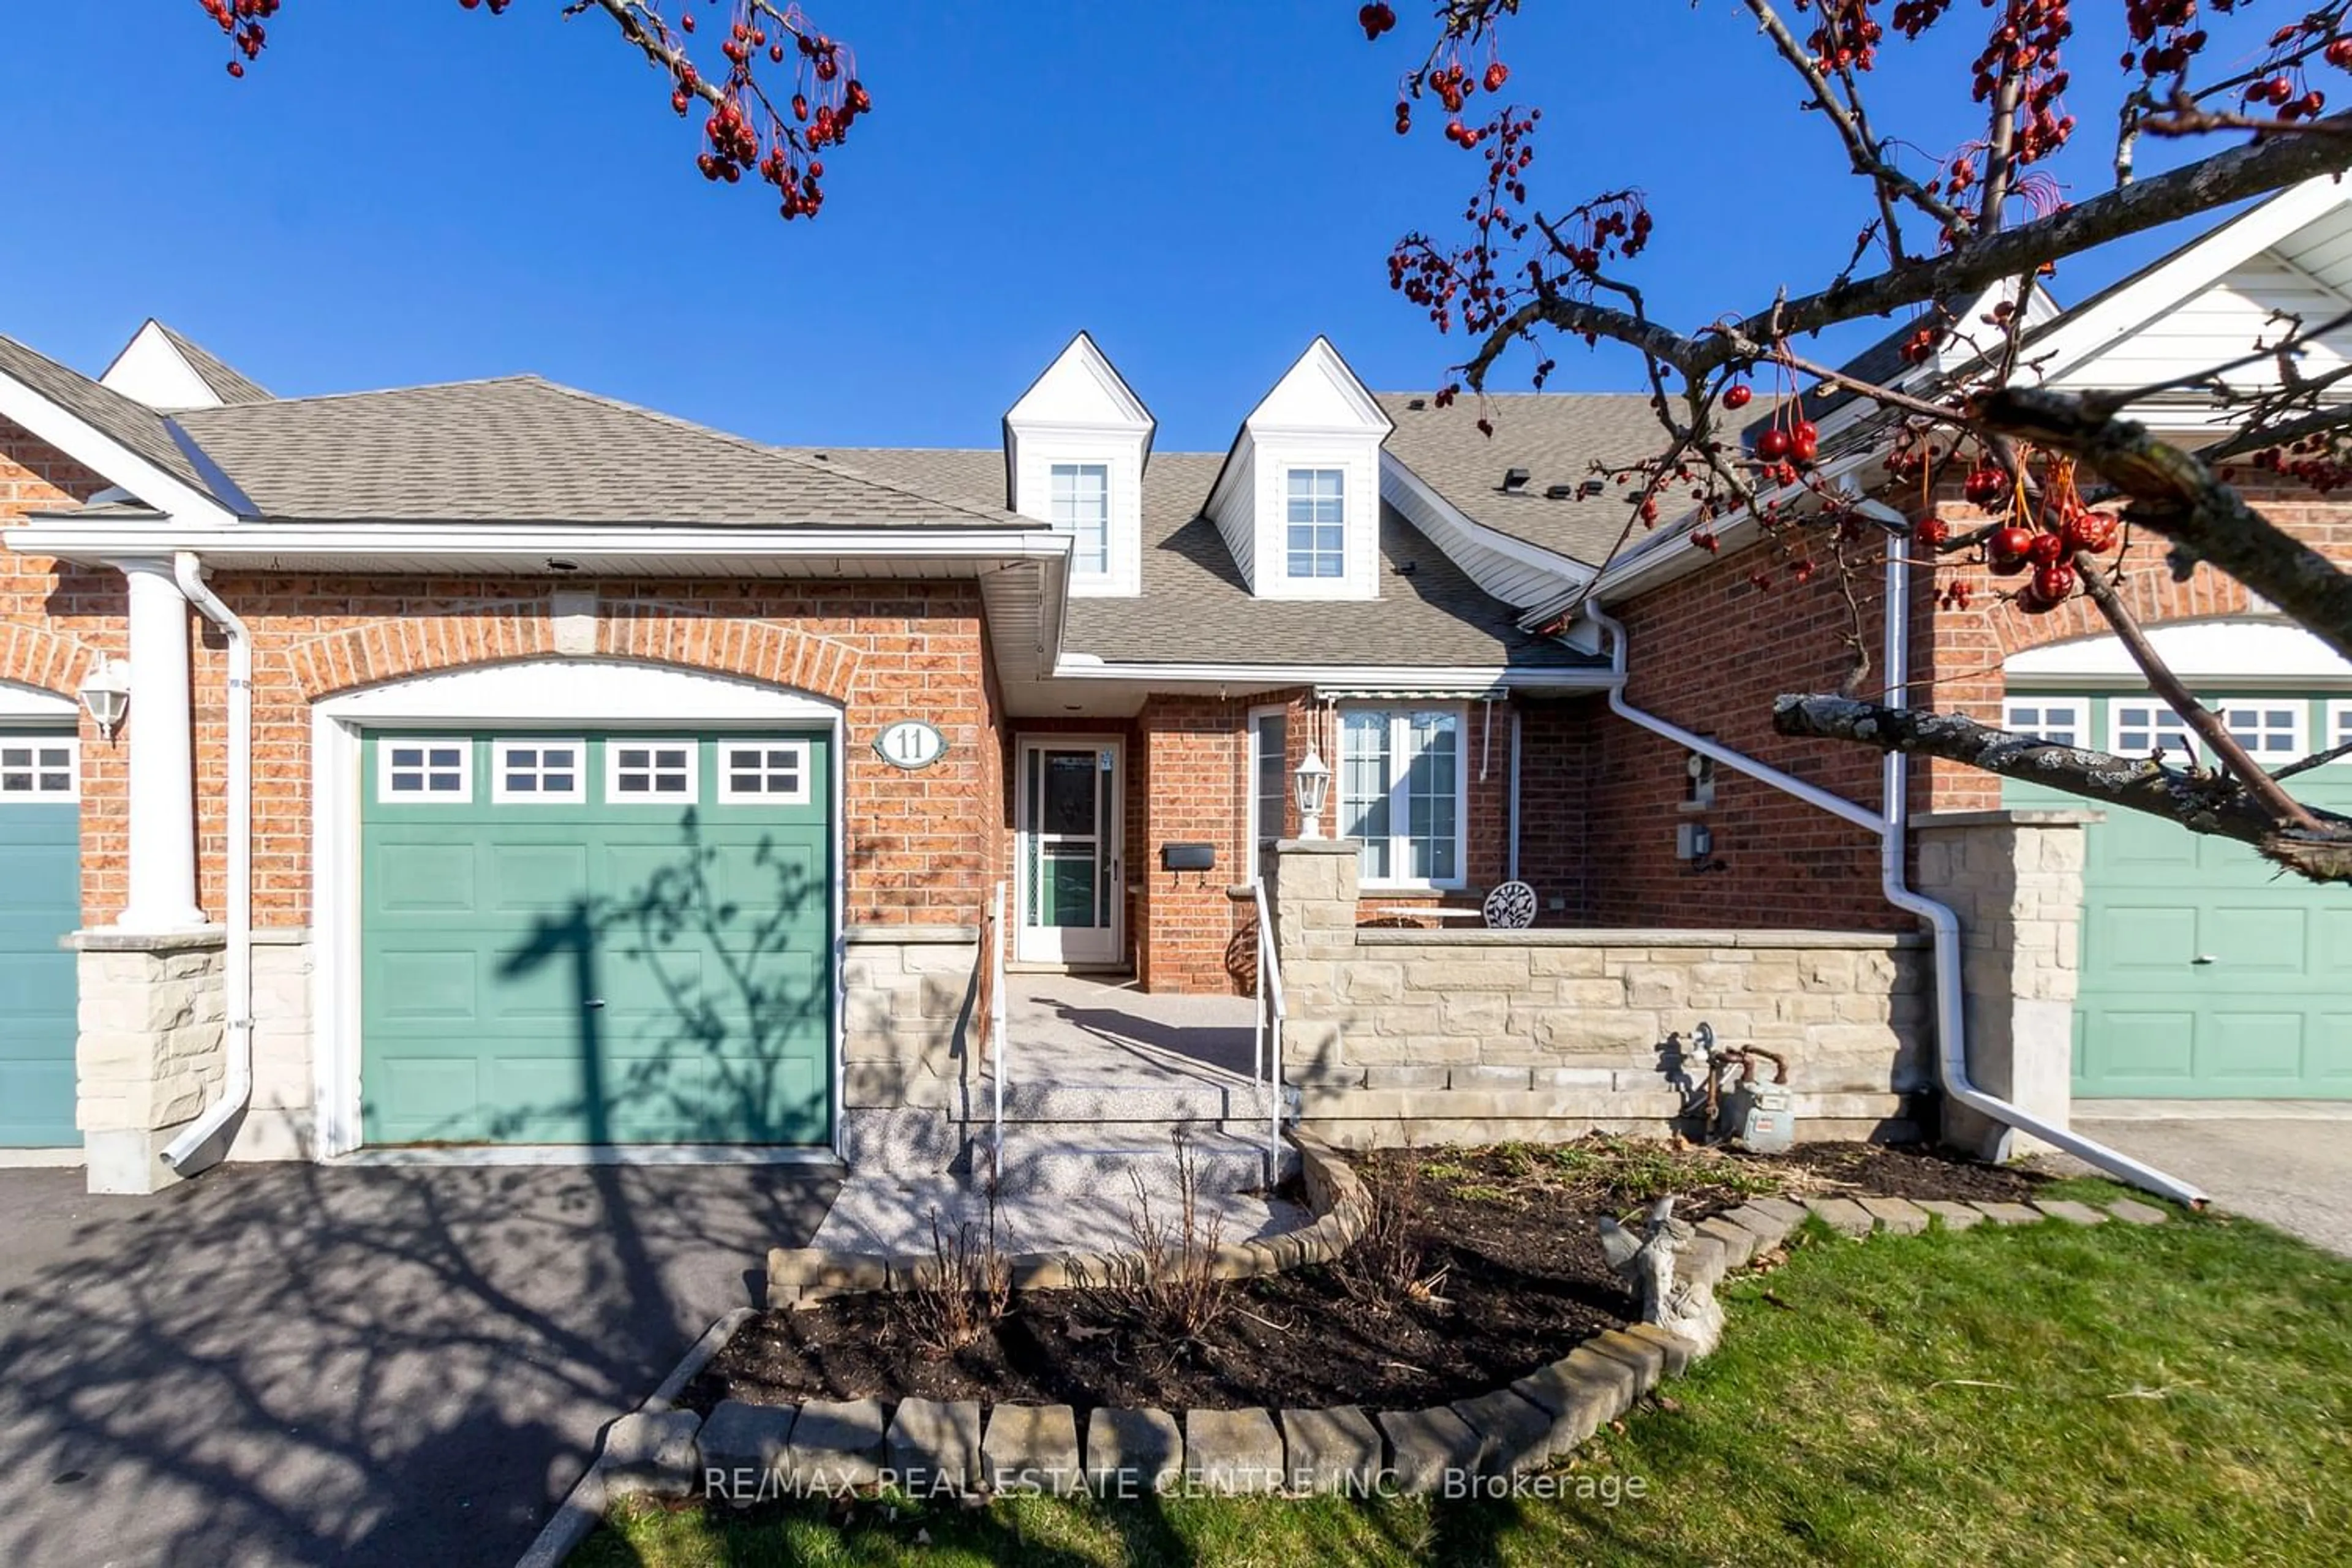 Home with brick exterior material for 11 Somerset Glen, Guelph Ontario N1G 5G1